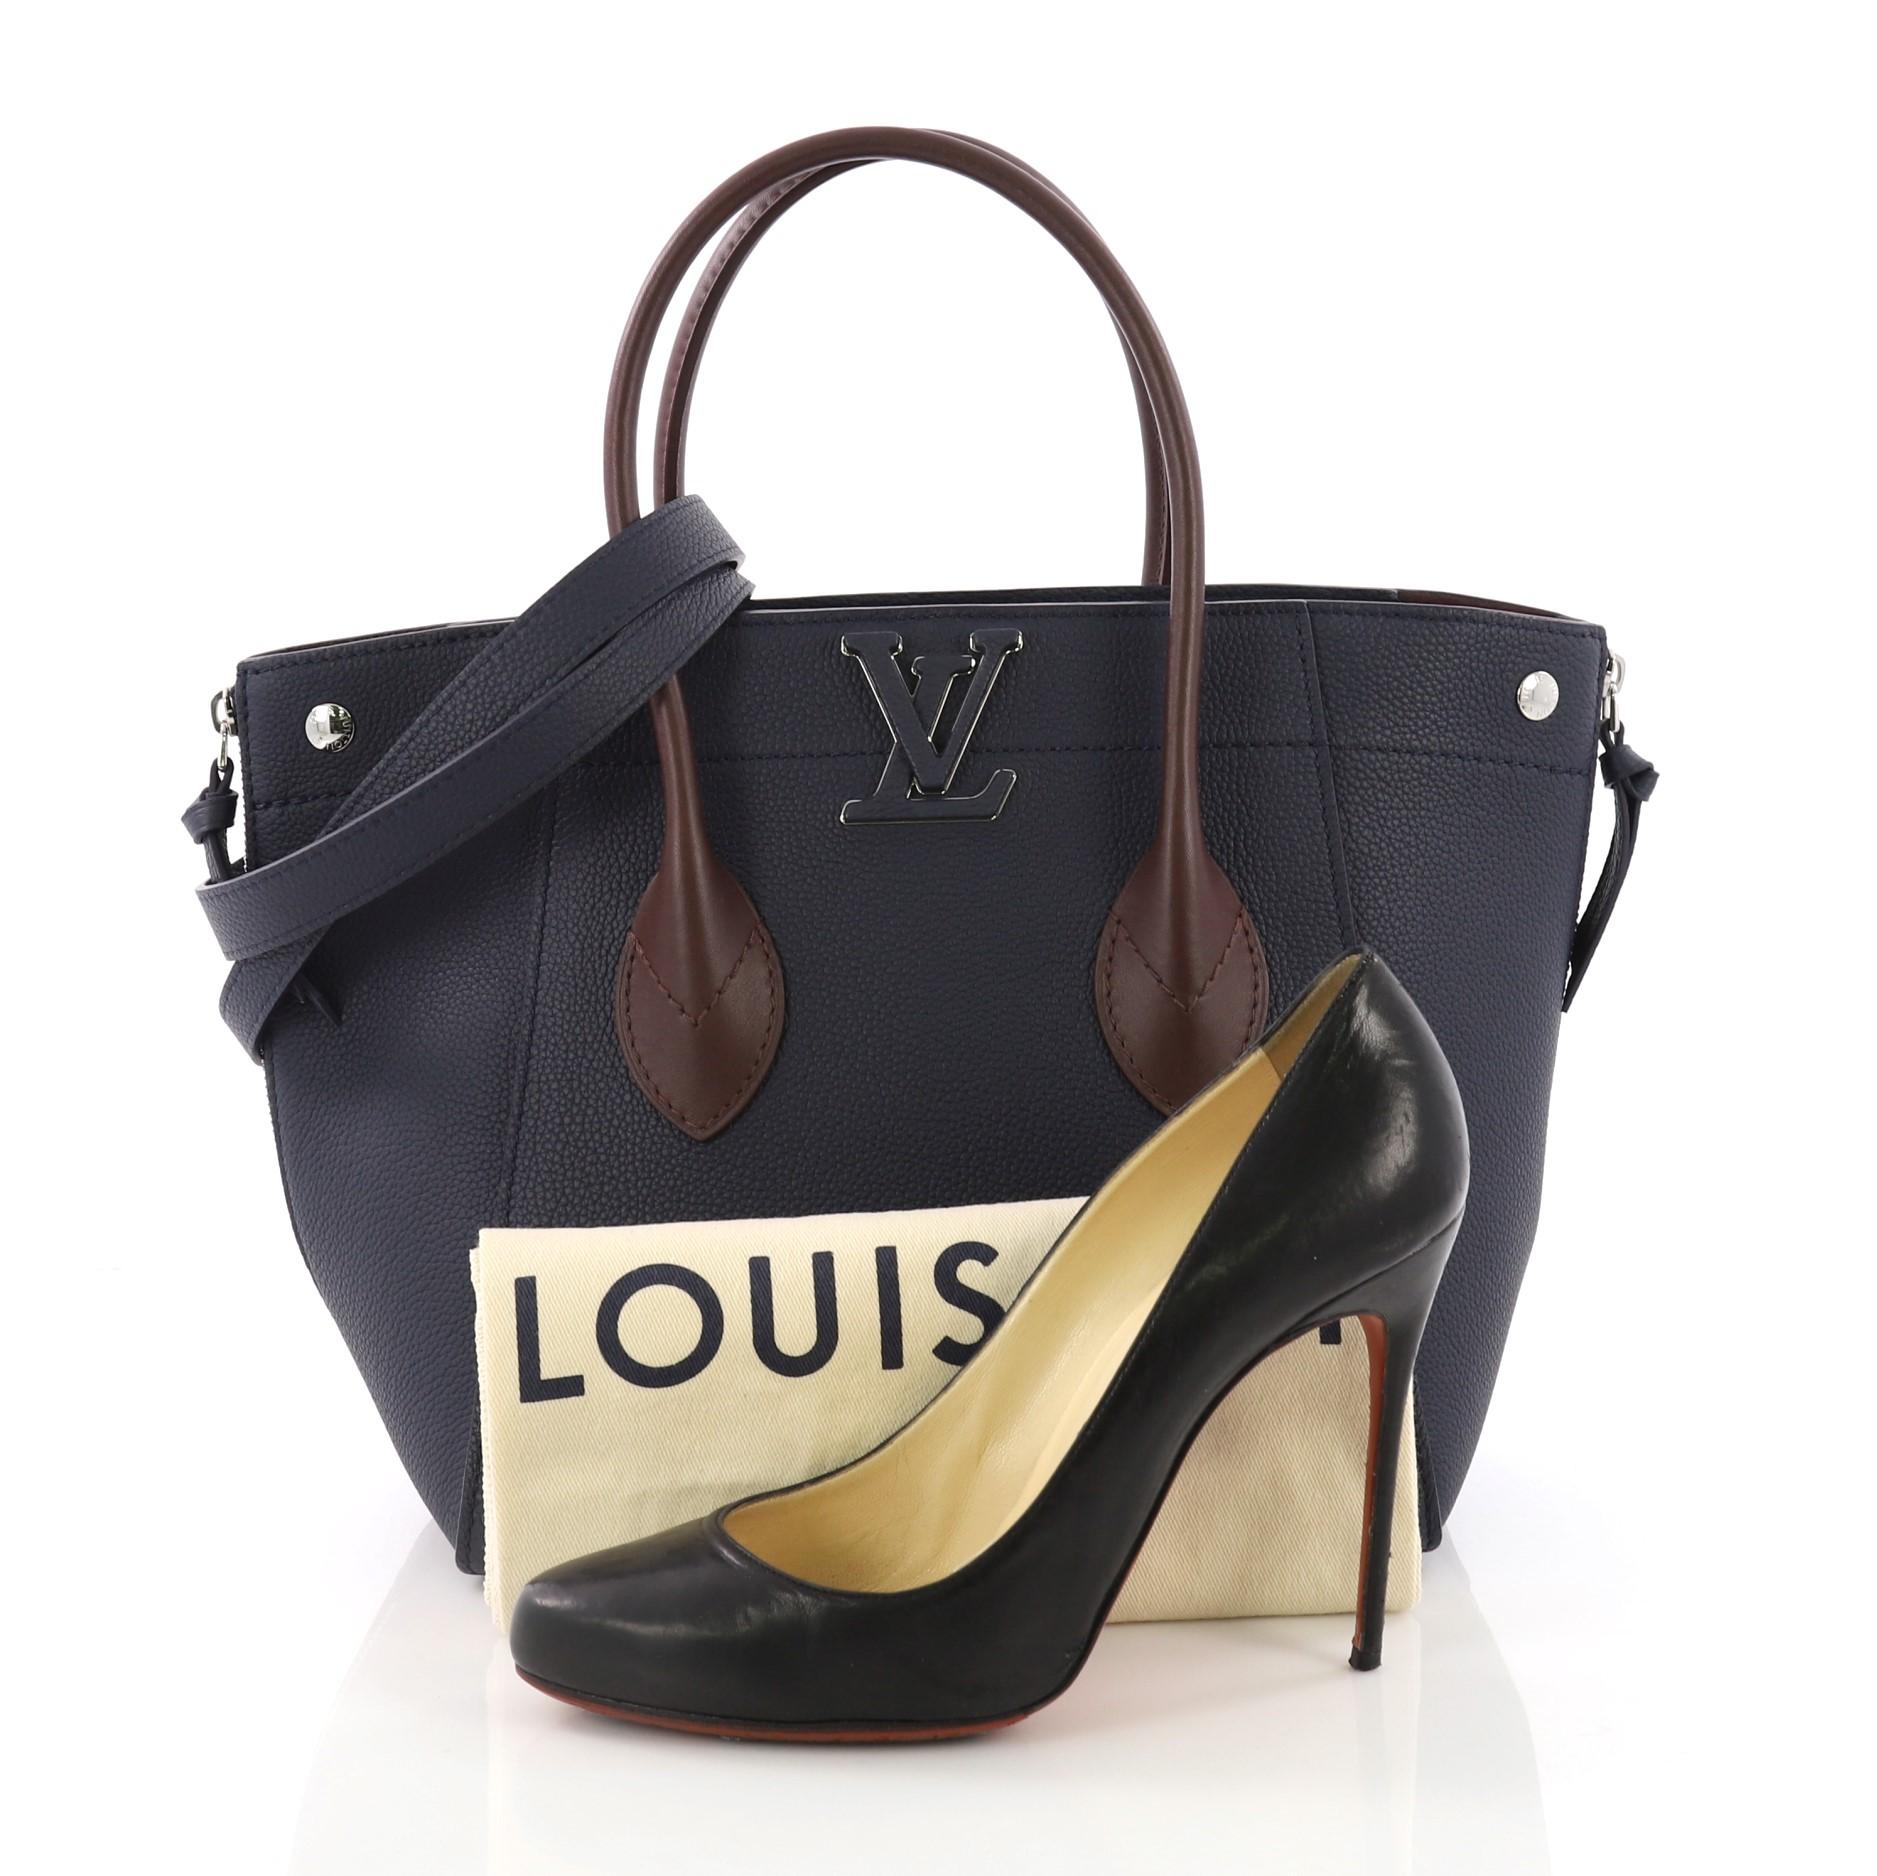 This Louis Vuitton Freedom Handbag Calfskin, crafted in blue calfskin leather, features dual rolled leather handles, cut out leather LV logo on front, side zippers, and silver-tone hardware. Its zip closure opens to a purple microfiber interior with